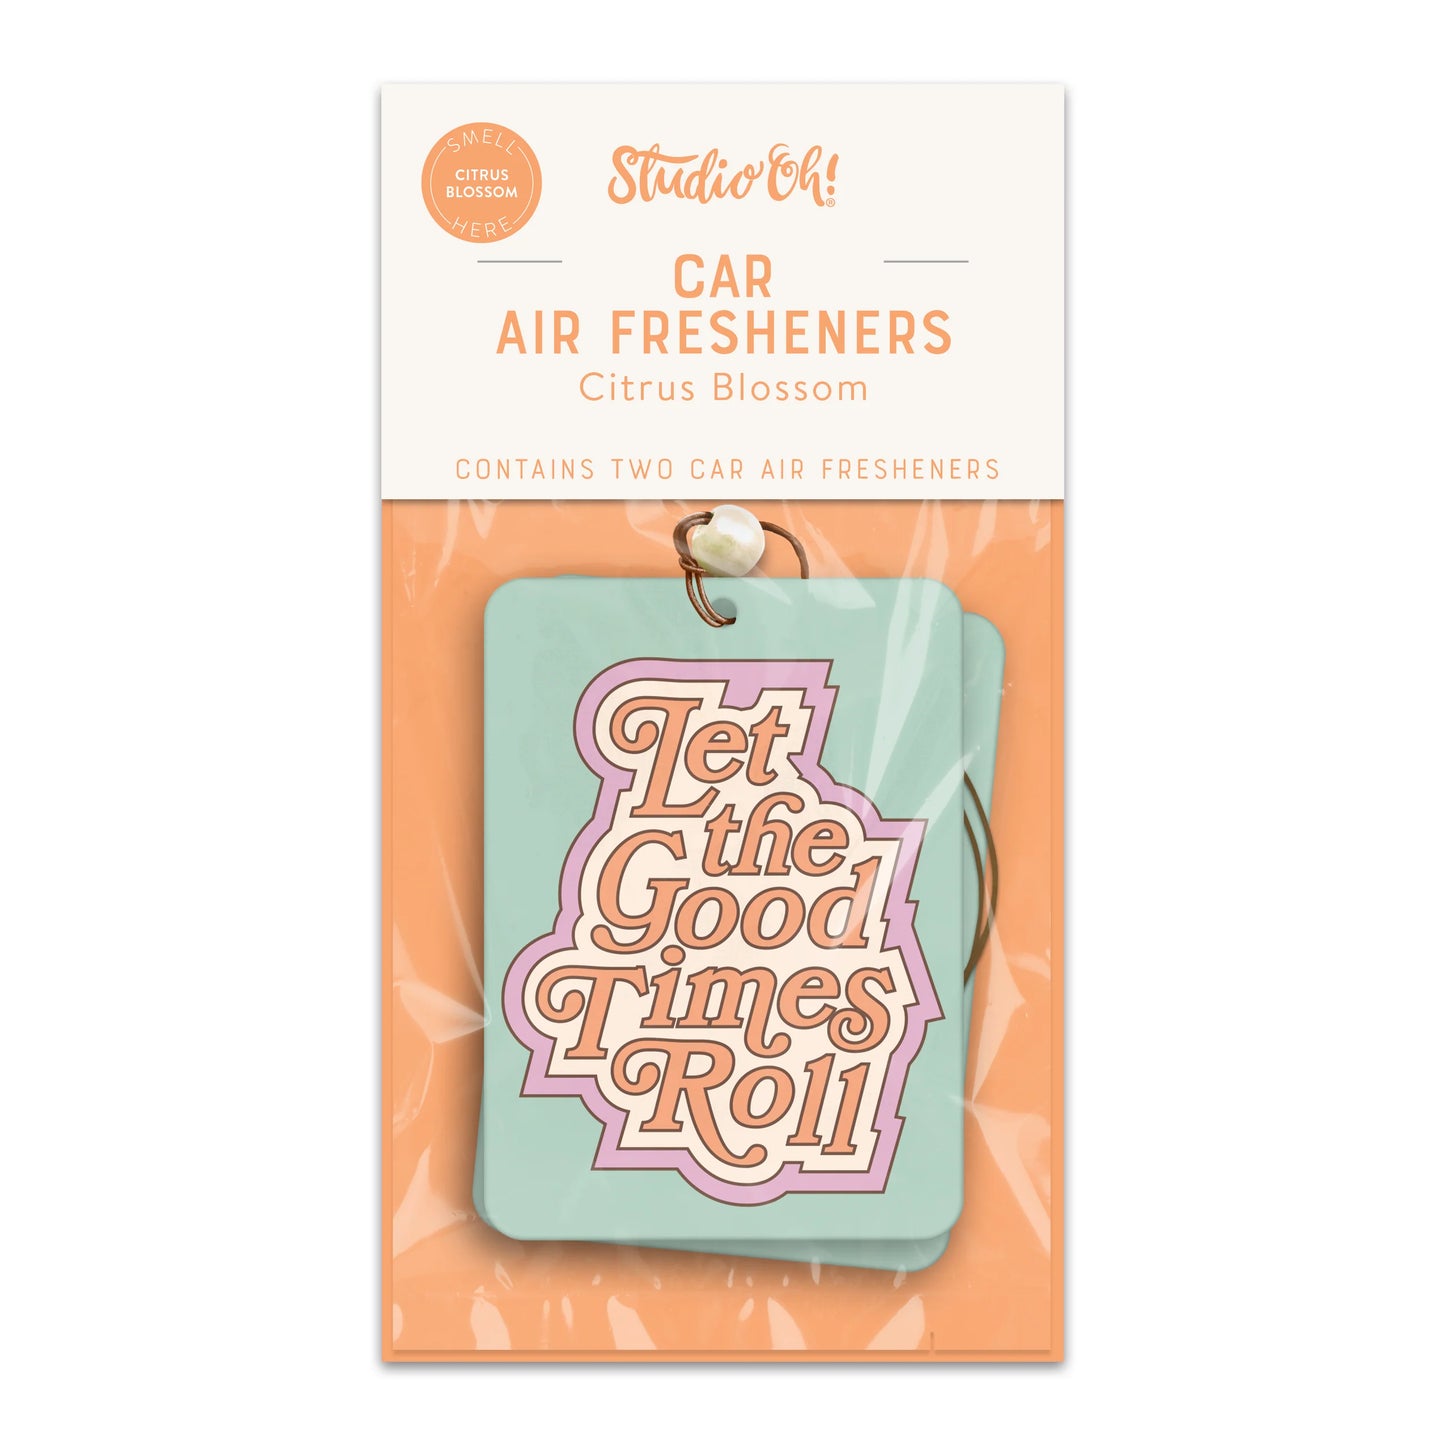 Car Air Fresheners - Let the Good Times Roll